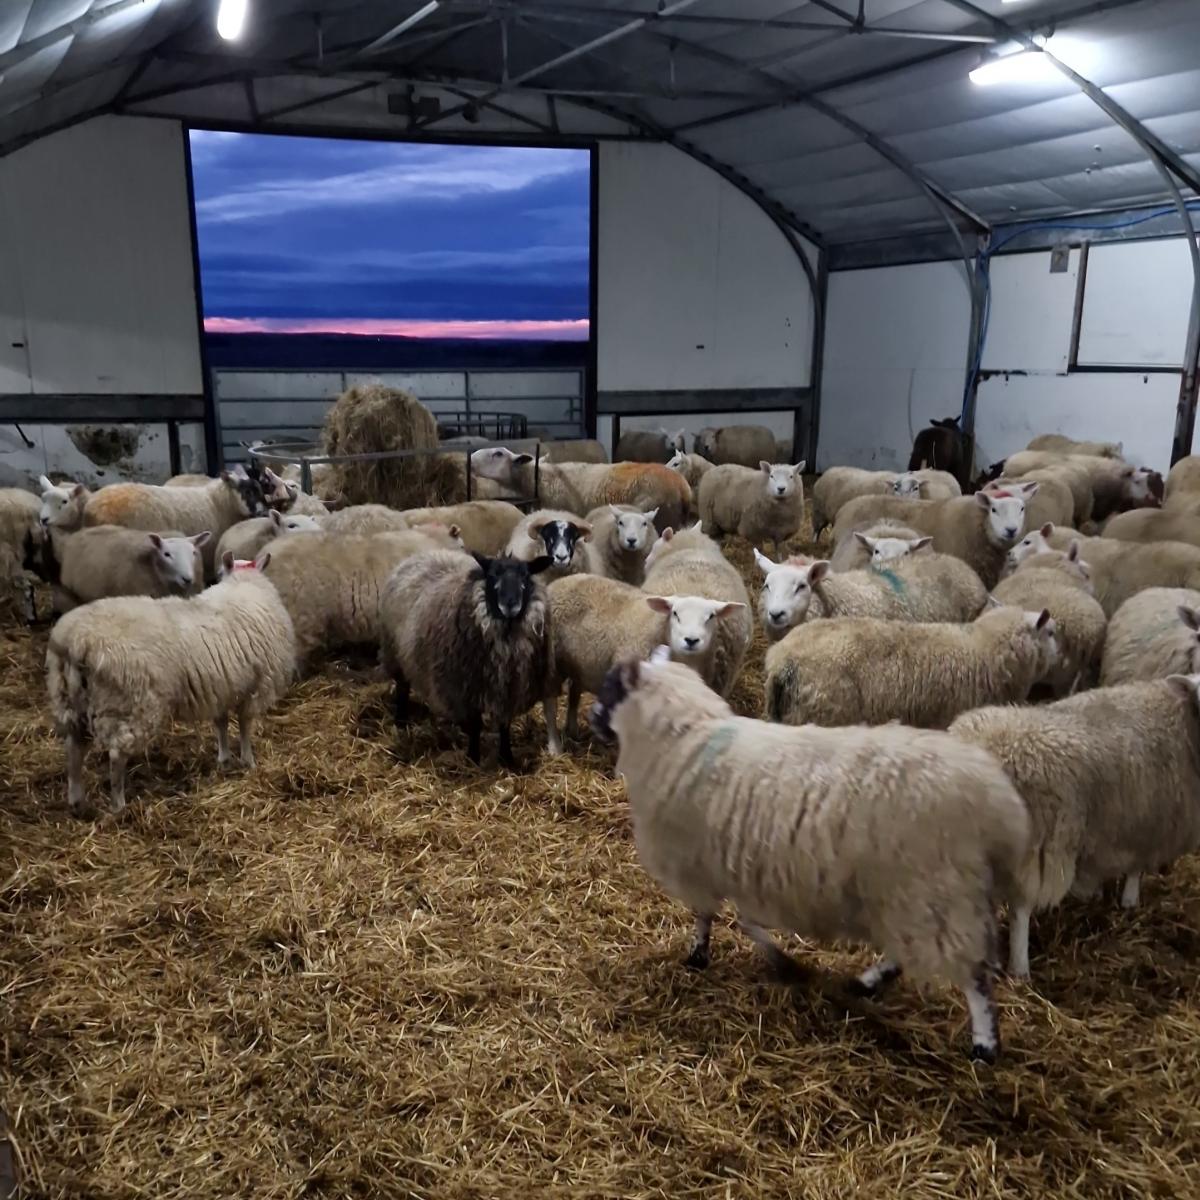 Jim MacMillan - Lambs watching the recently installed big screen at East Durran Caithness